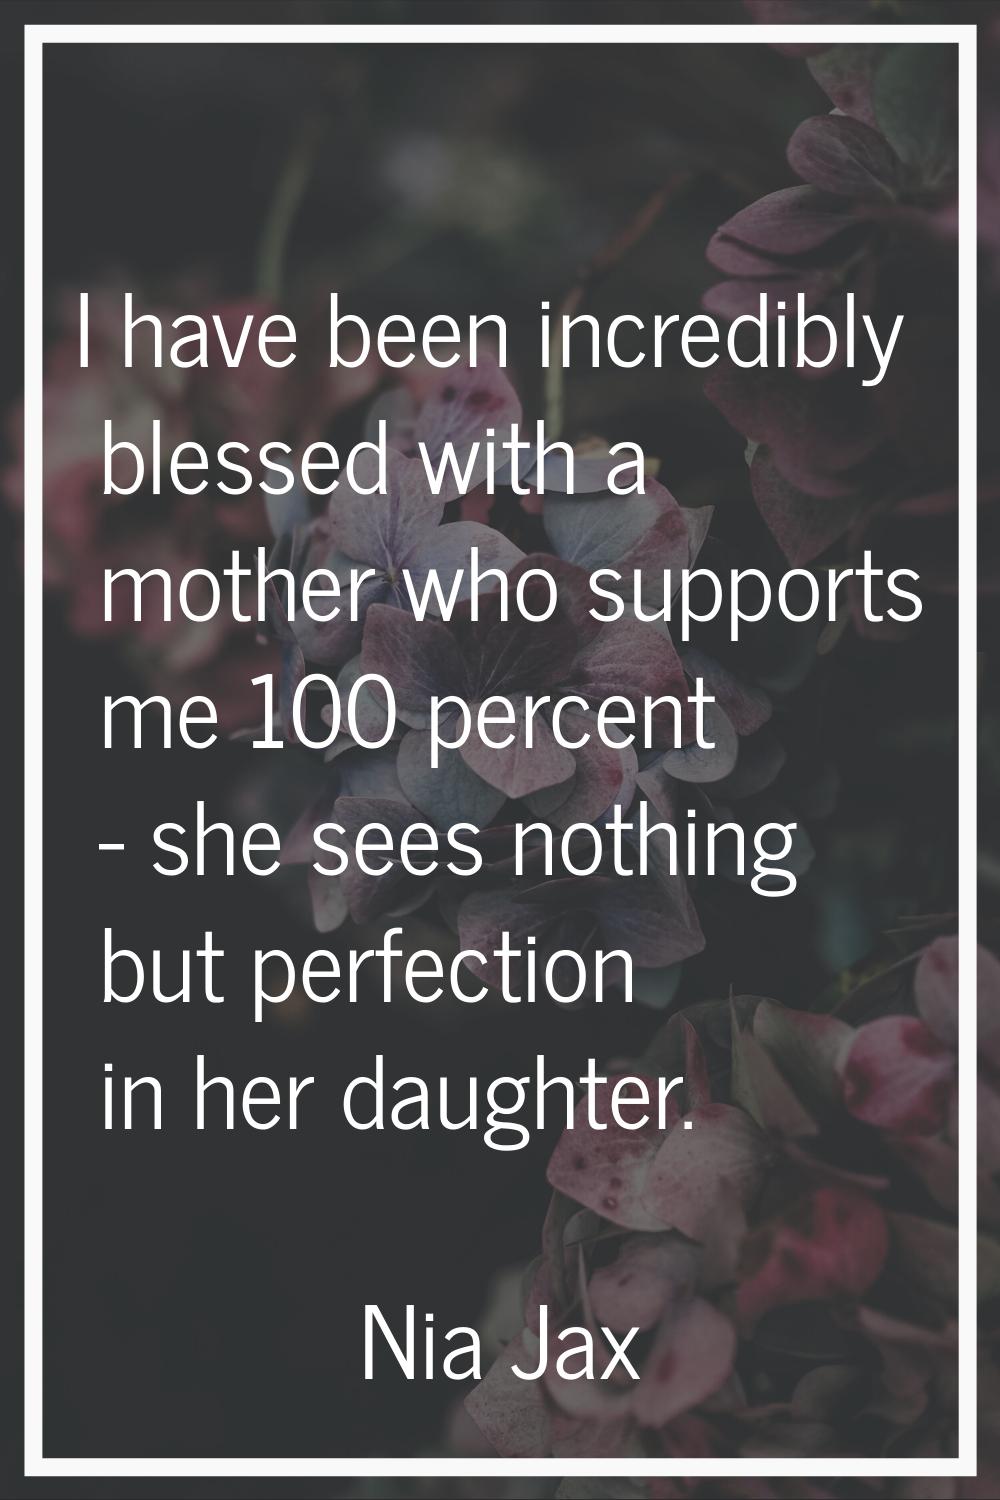 I have been incredibly blessed with a mother who supports me 100 percent - she sees nothing but per